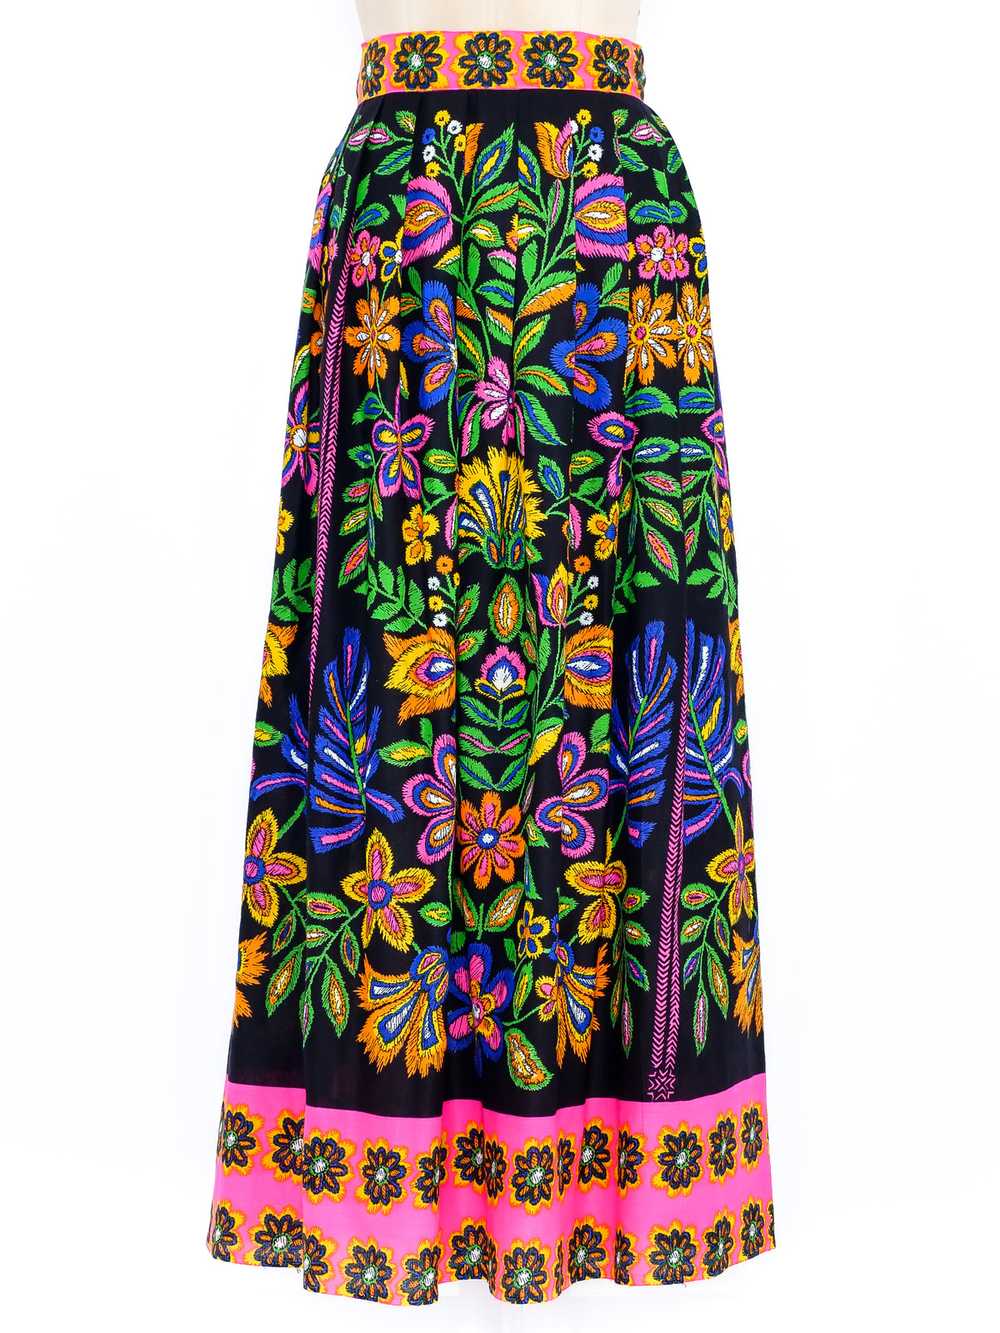 Psychedelic Floral Printed Skirt - image 1